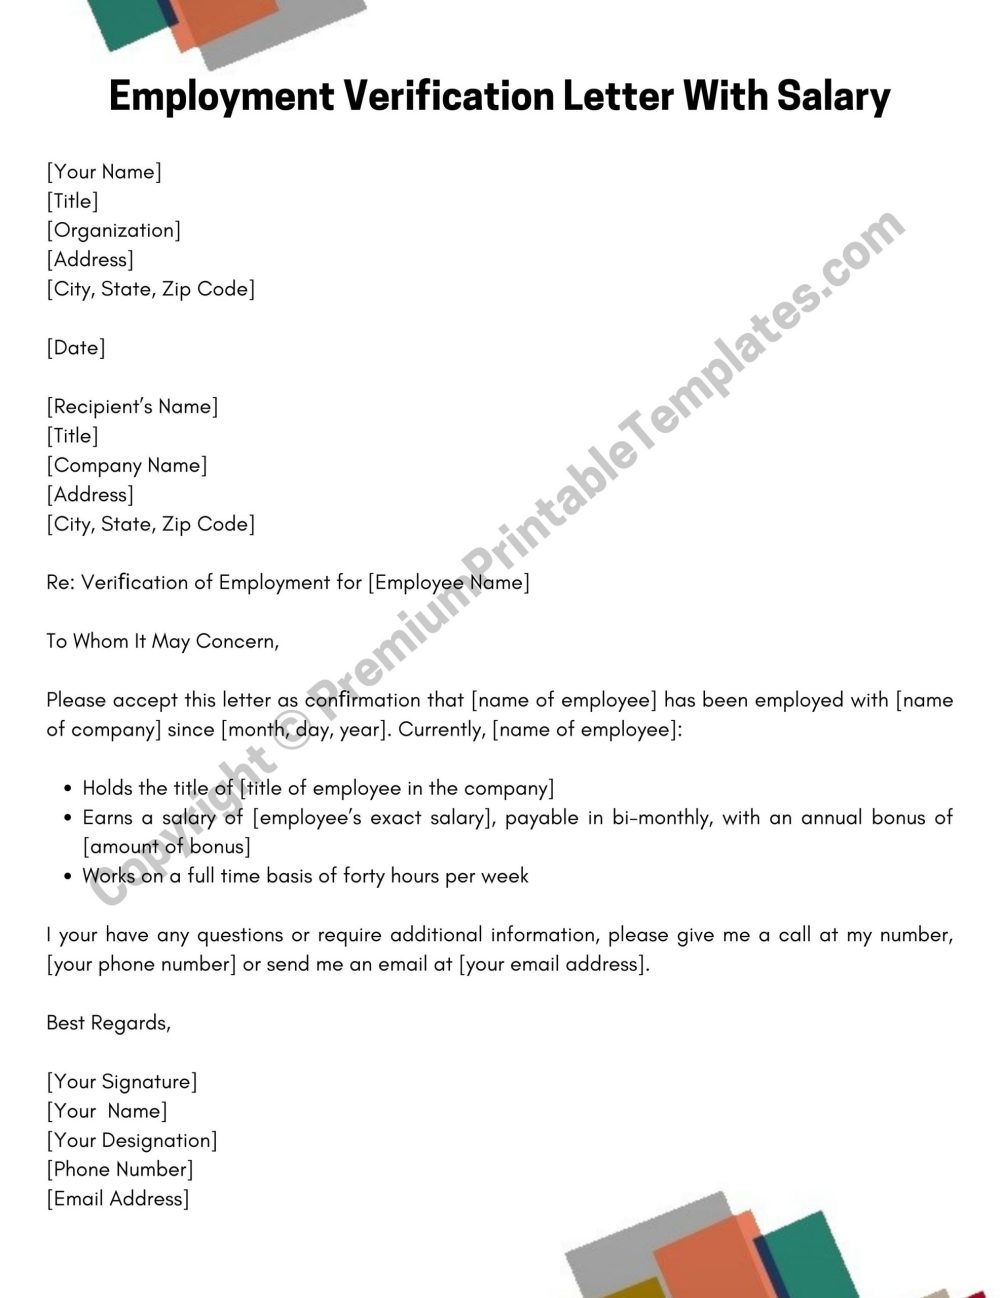 Employment Veriﬁcation Letter With Salary Template